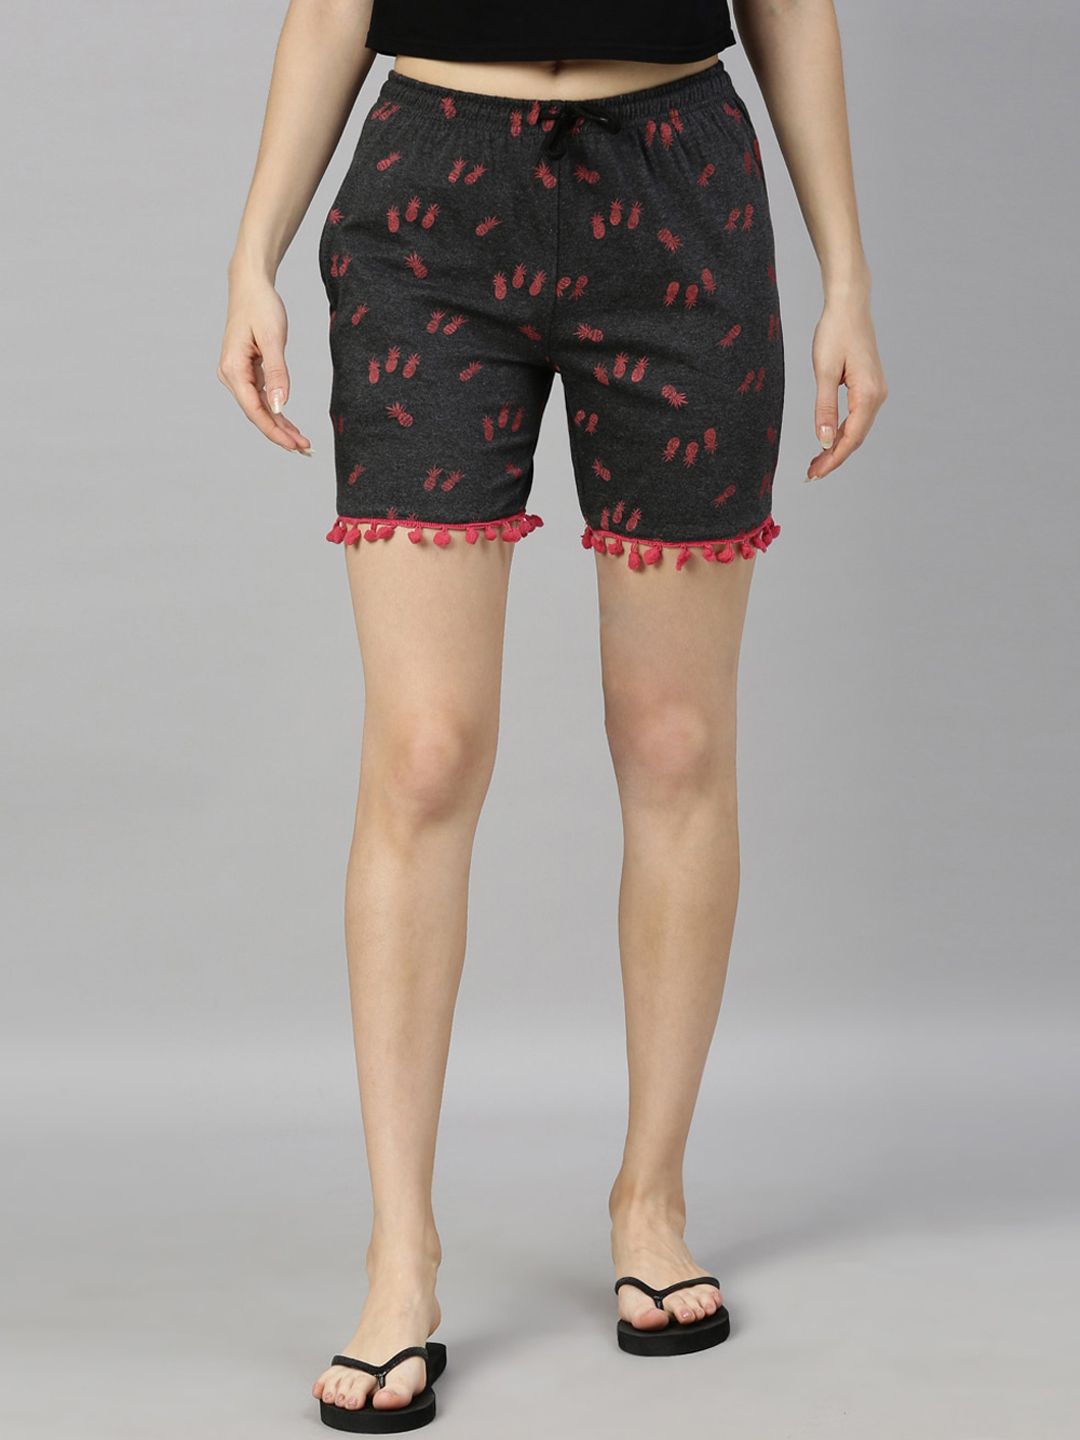 Kryptic Women Charcoal Grey Printed Lounge Shorts Price in India